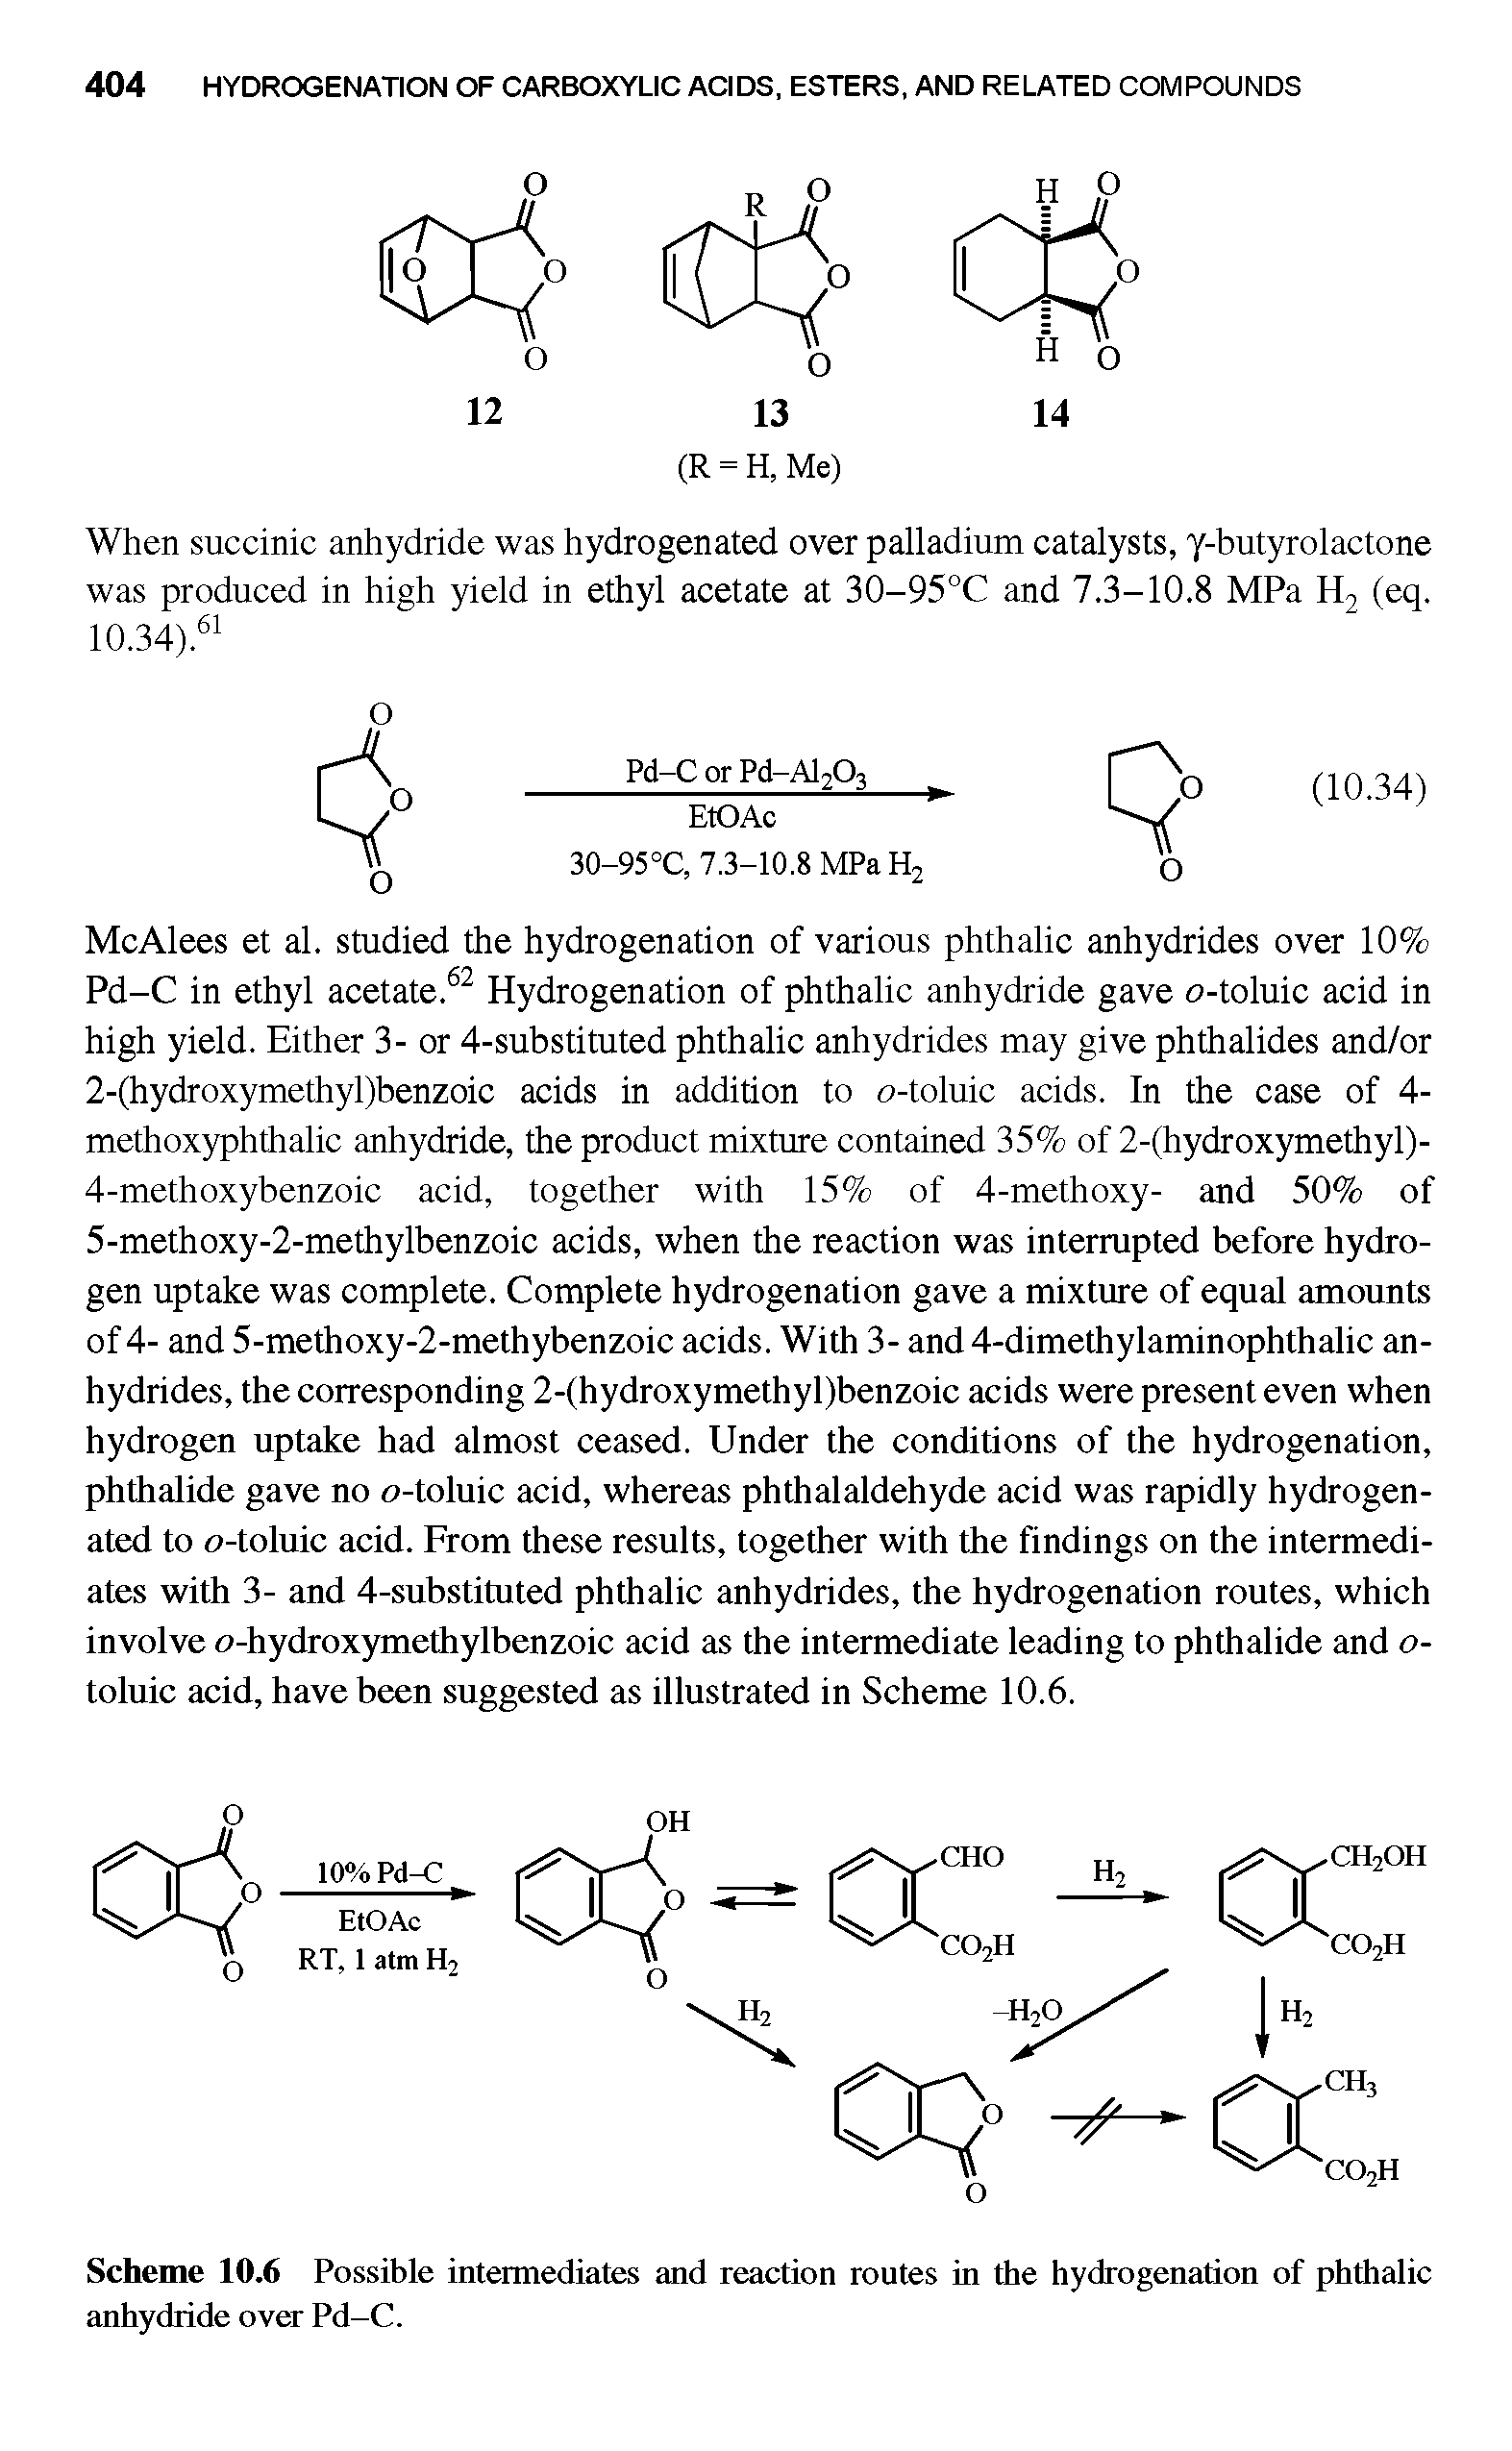 Scheme 10.6 Possible intermediates and reaction routes in the hydrogenation of phthalic anhydride over Pd-C.